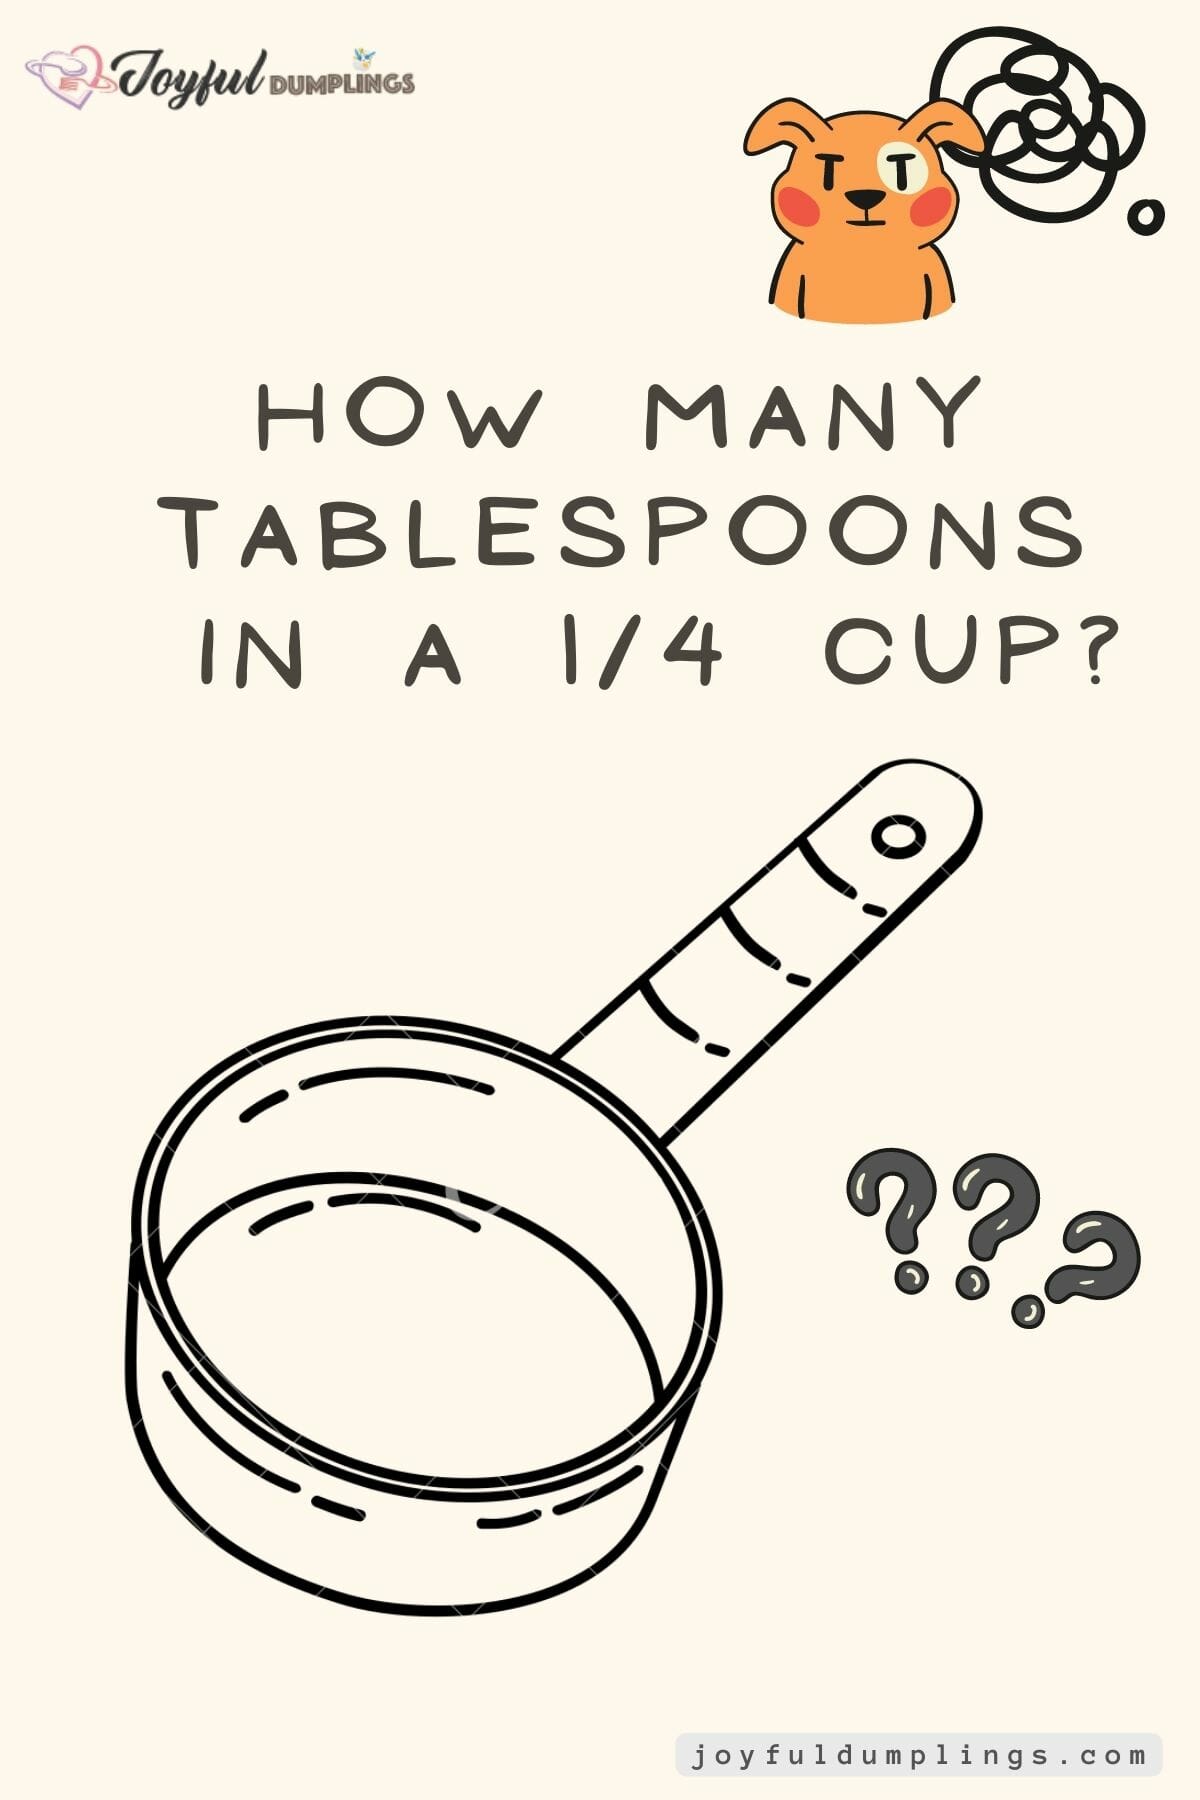 How Many Tablespoons in a Cup, and Other Conversions